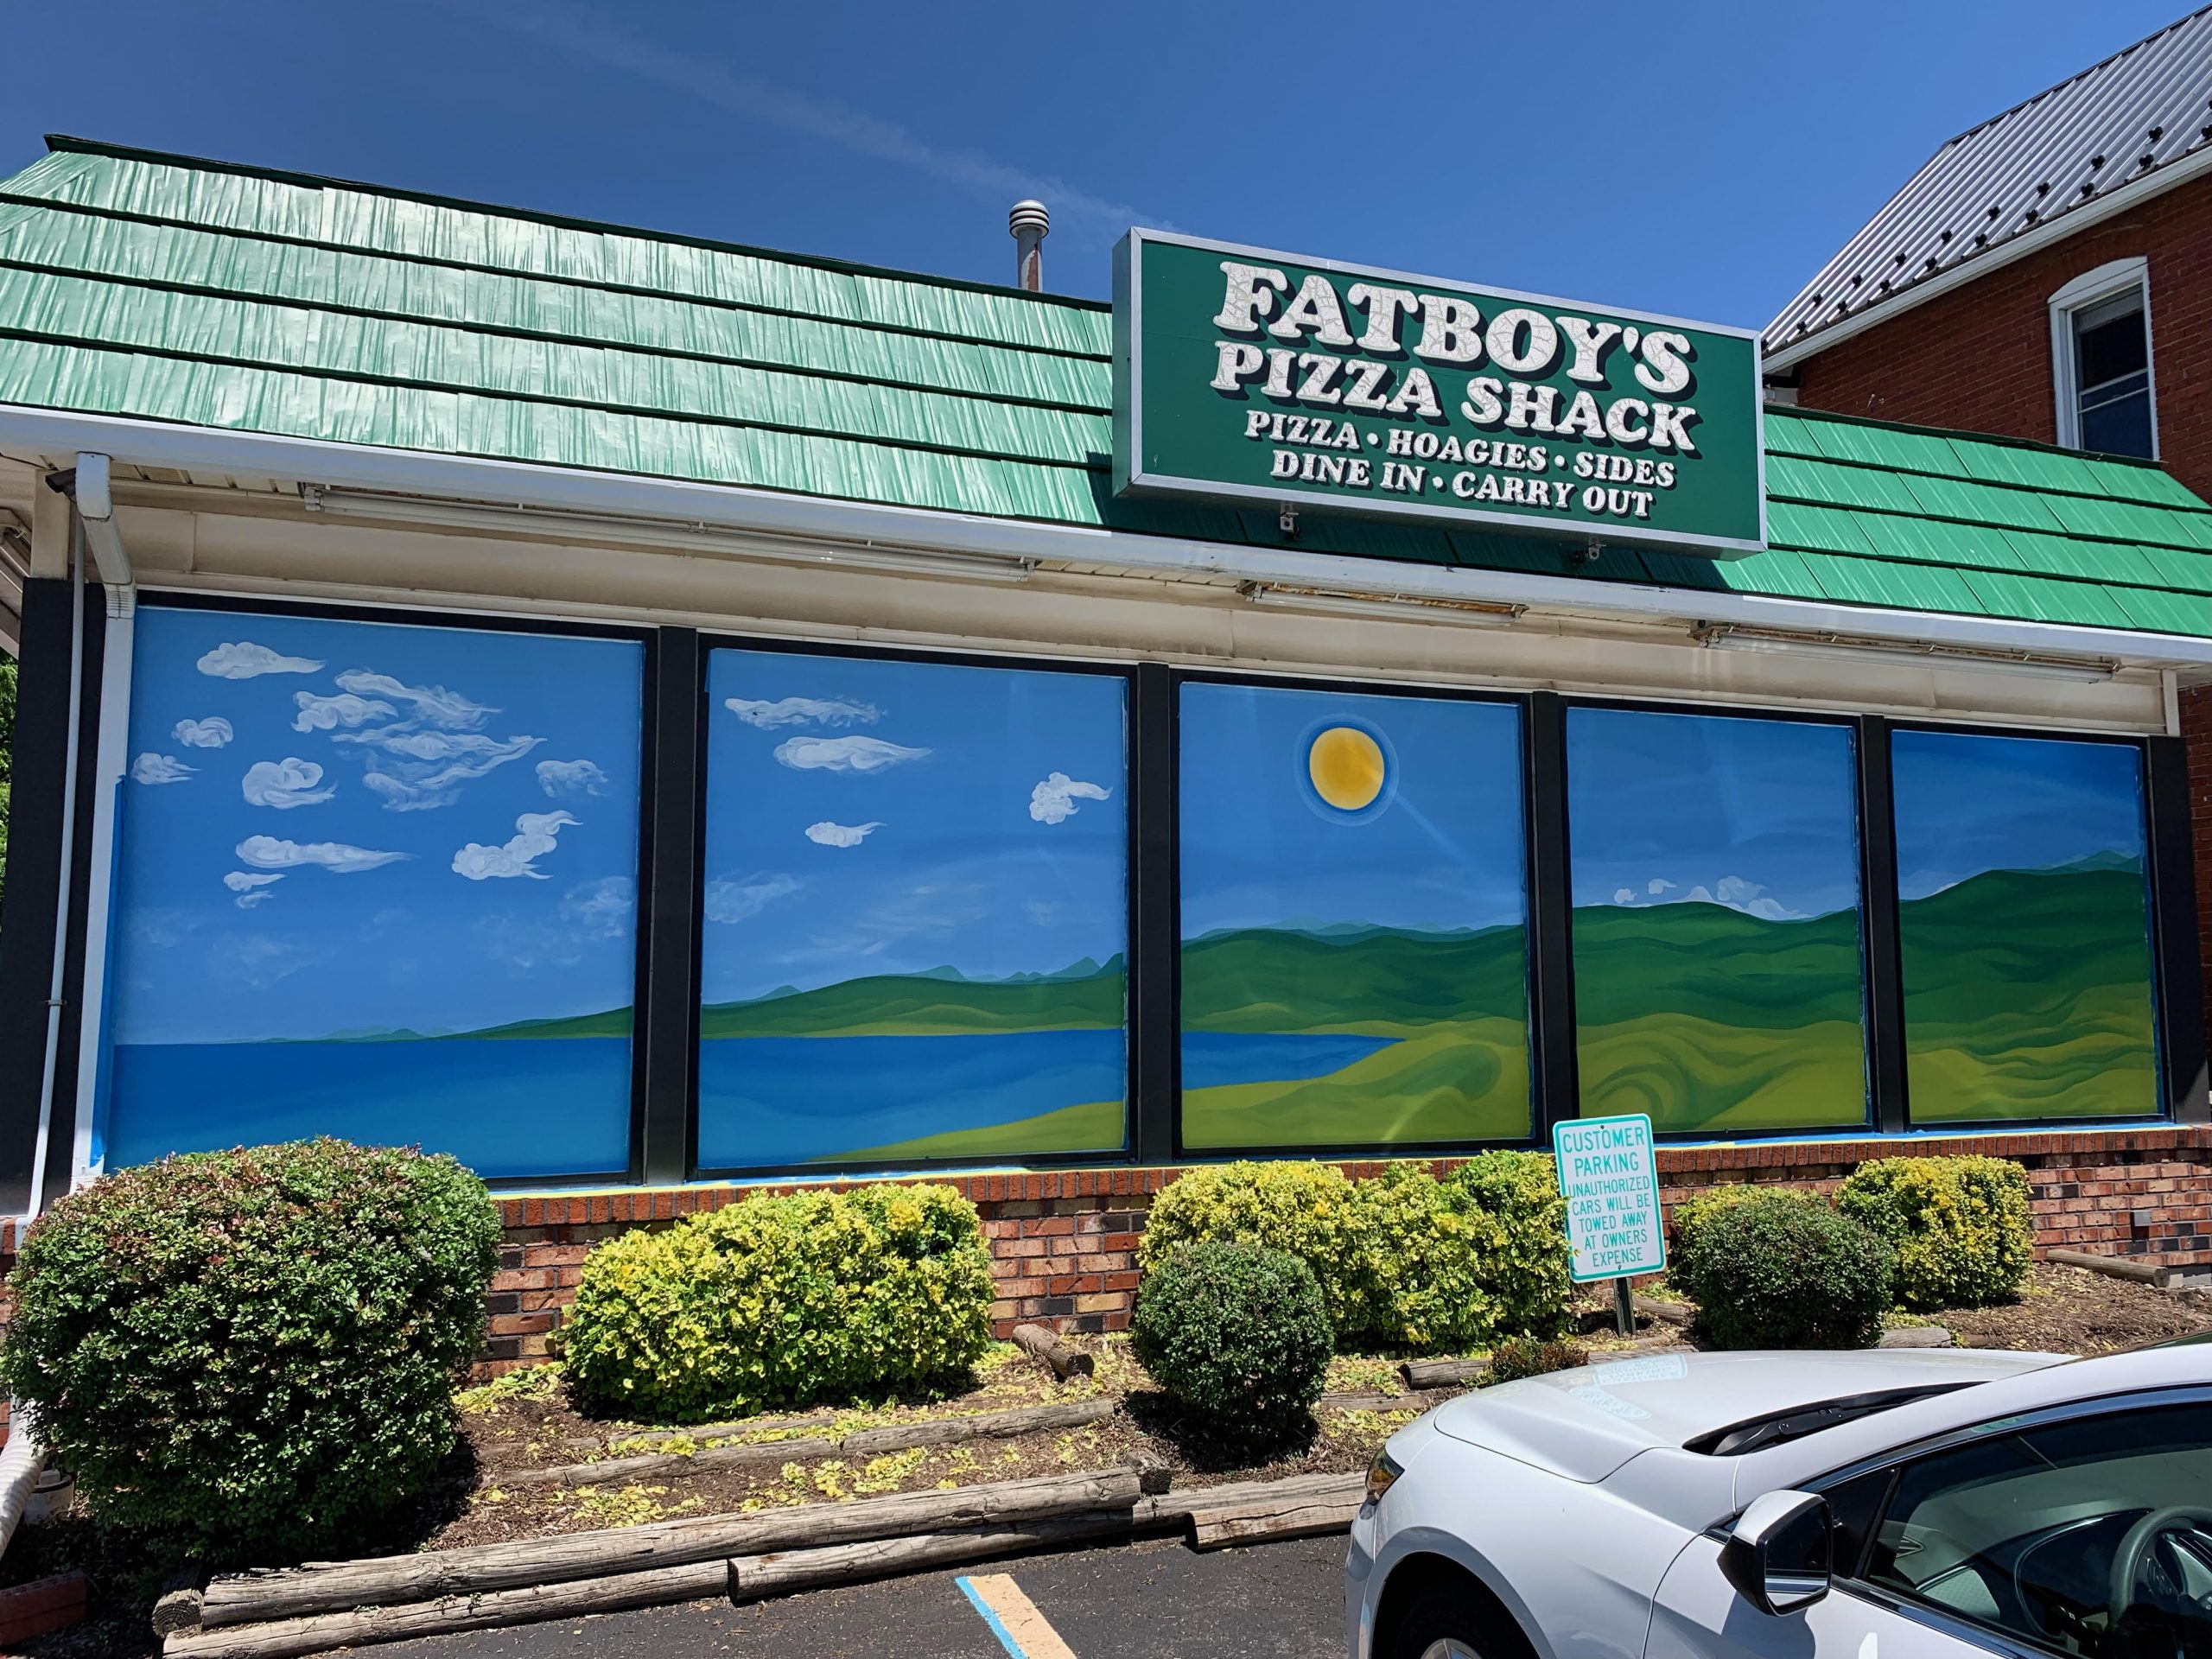 Fatboy’s Pizza Mural Frostburg, MD